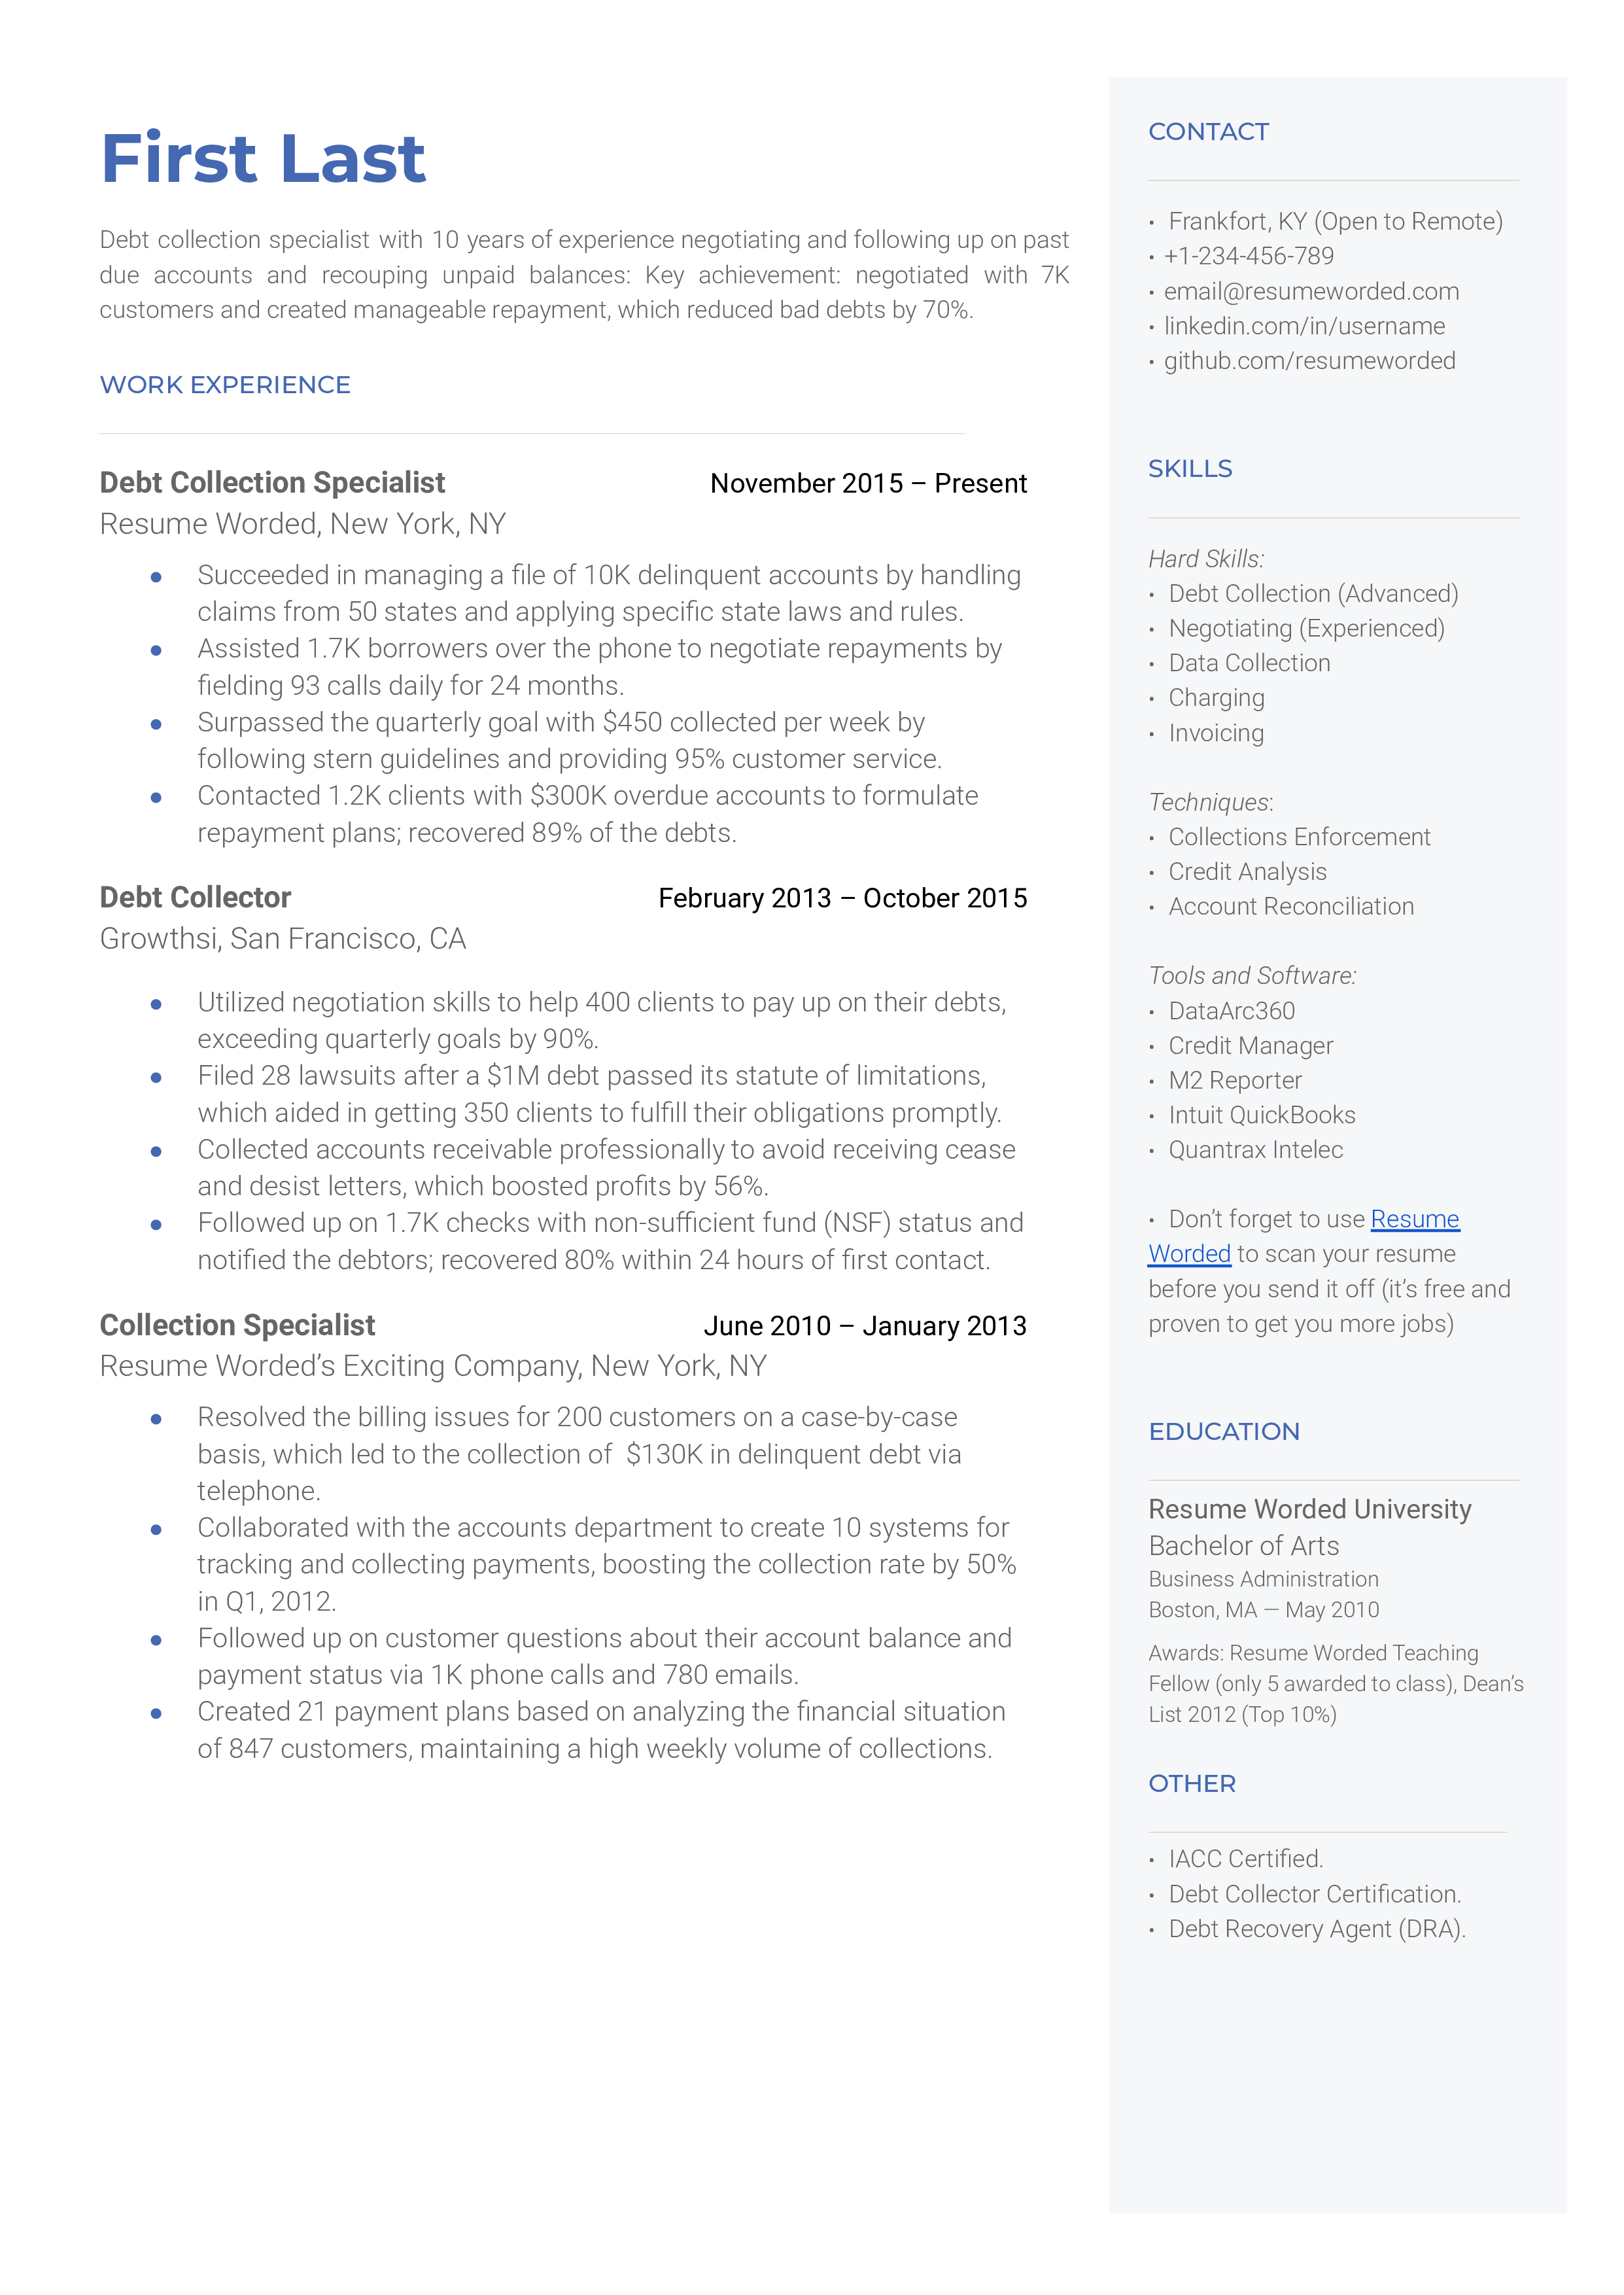 Debt Collection Specialist Resume Sample